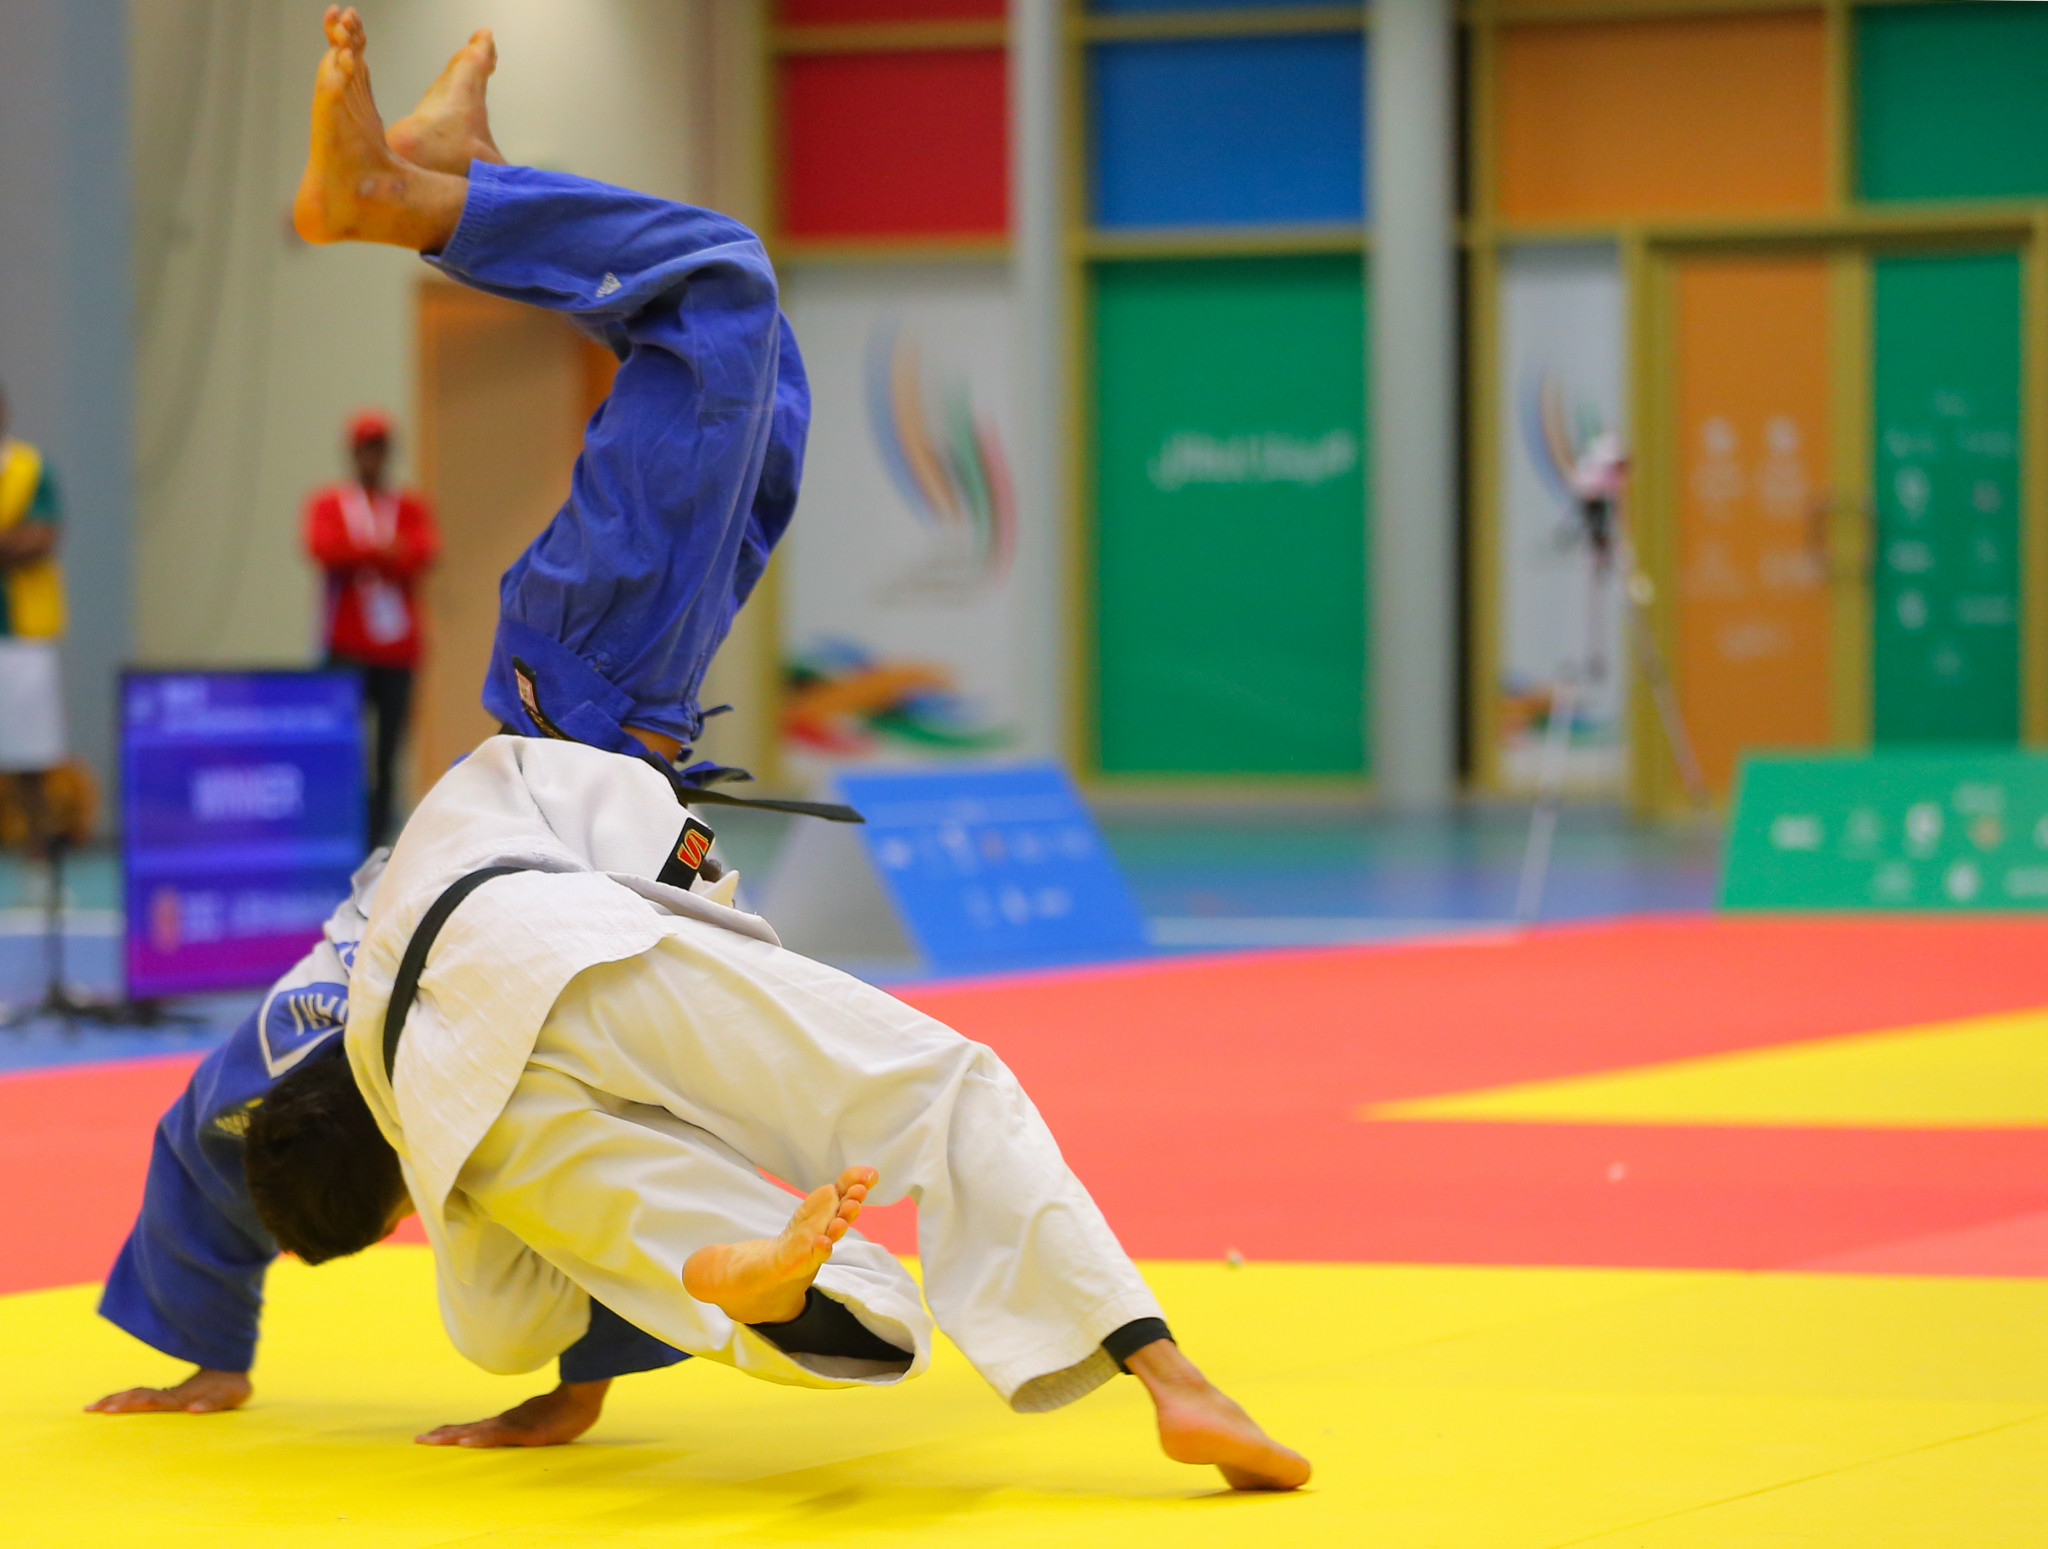 Five men's divisions in judo were staged at the Saudi Games today  ©Saudi Games